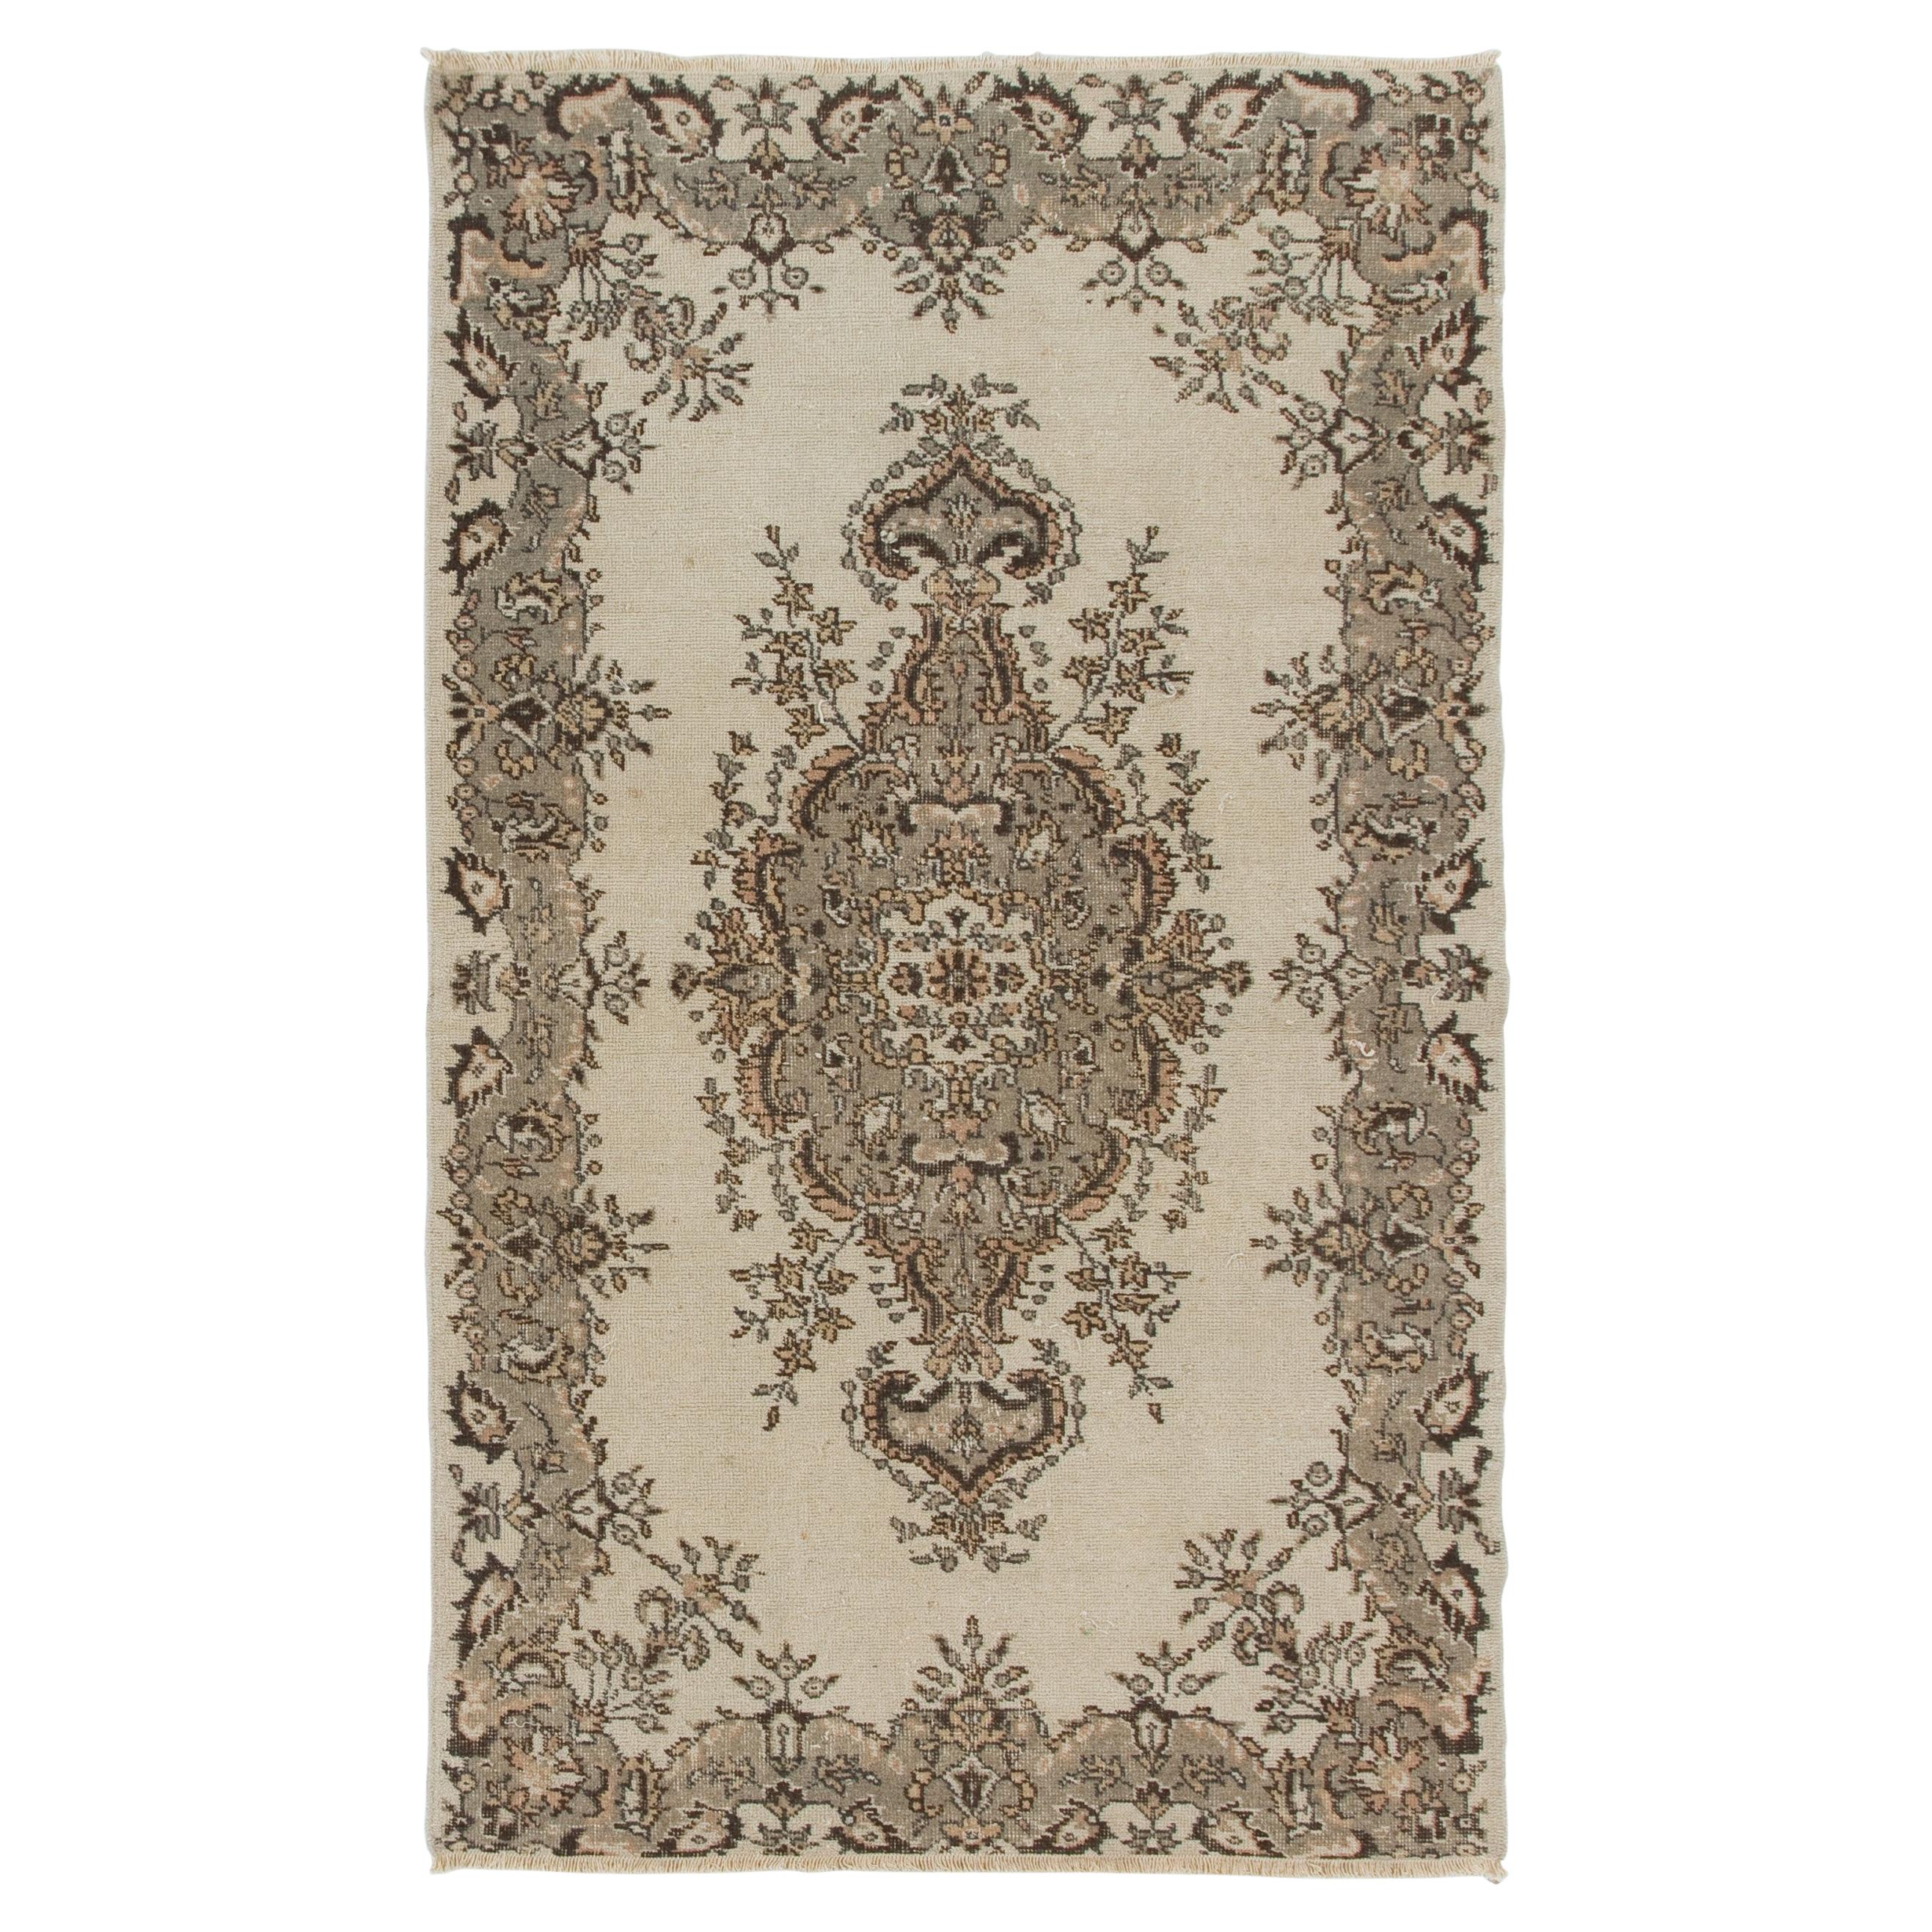 4x6.8 Ft Vintage Hand Knotted Turkish Oushak Wool Area Rug in Beige, Gray